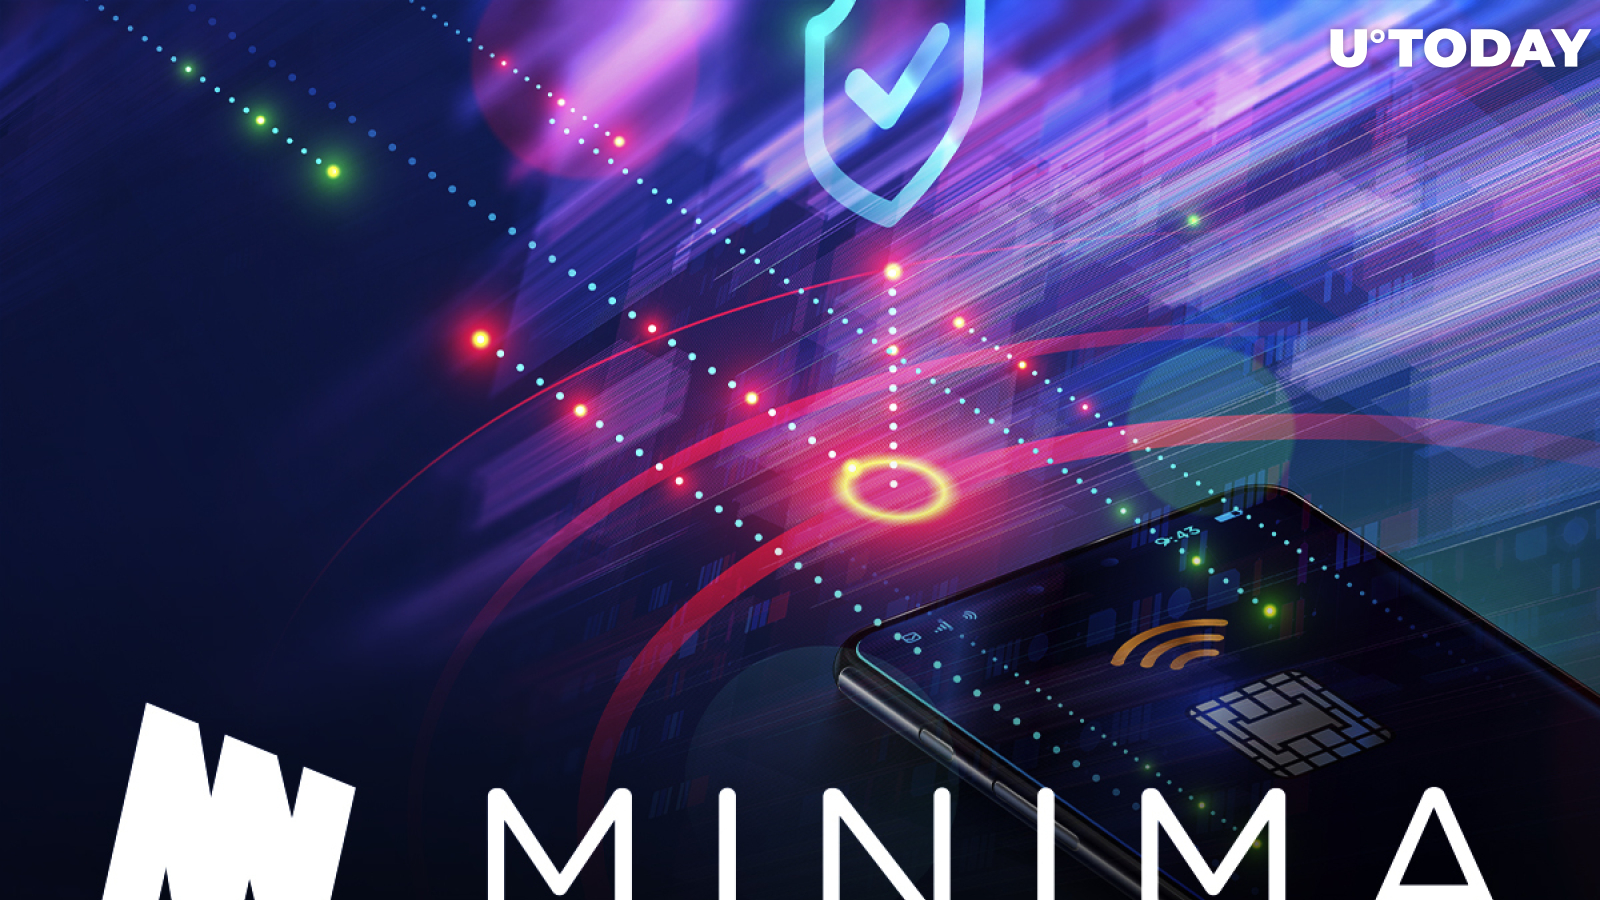 Minima Secures $6.5 Million in Series A to Build Mobile-First Blockchain Network